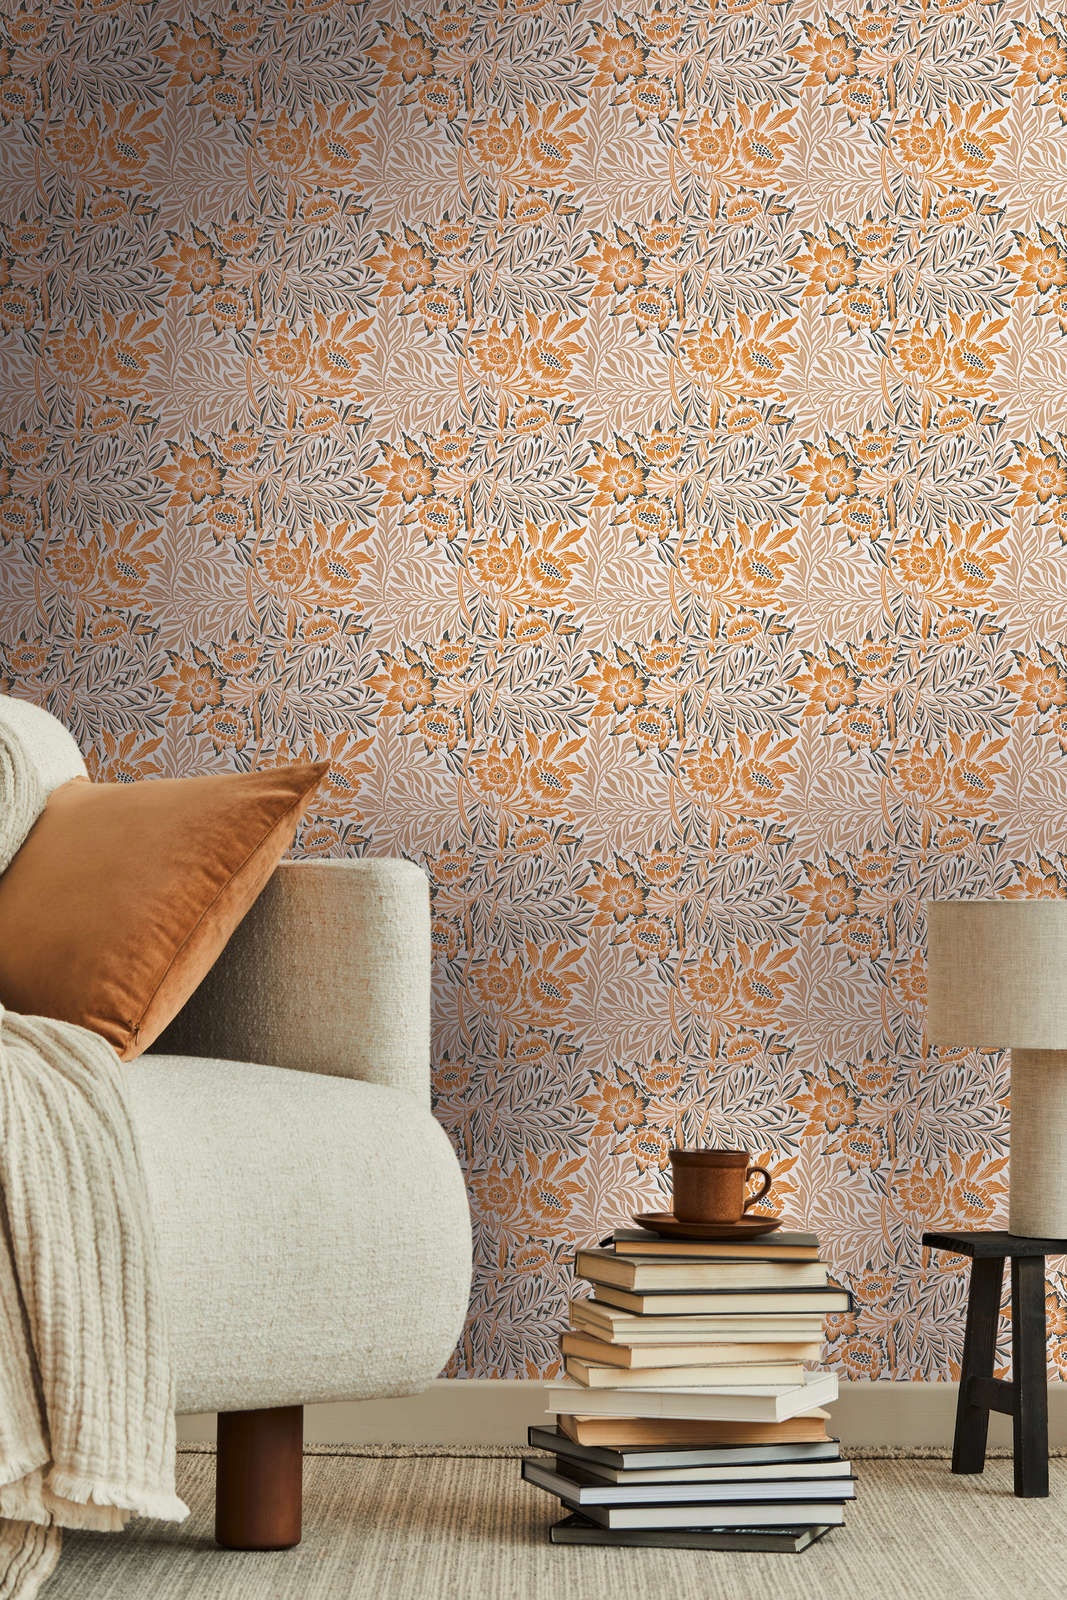             Non-woven wallpaper with flowers and leaf tendrils - orange, beige, white
        